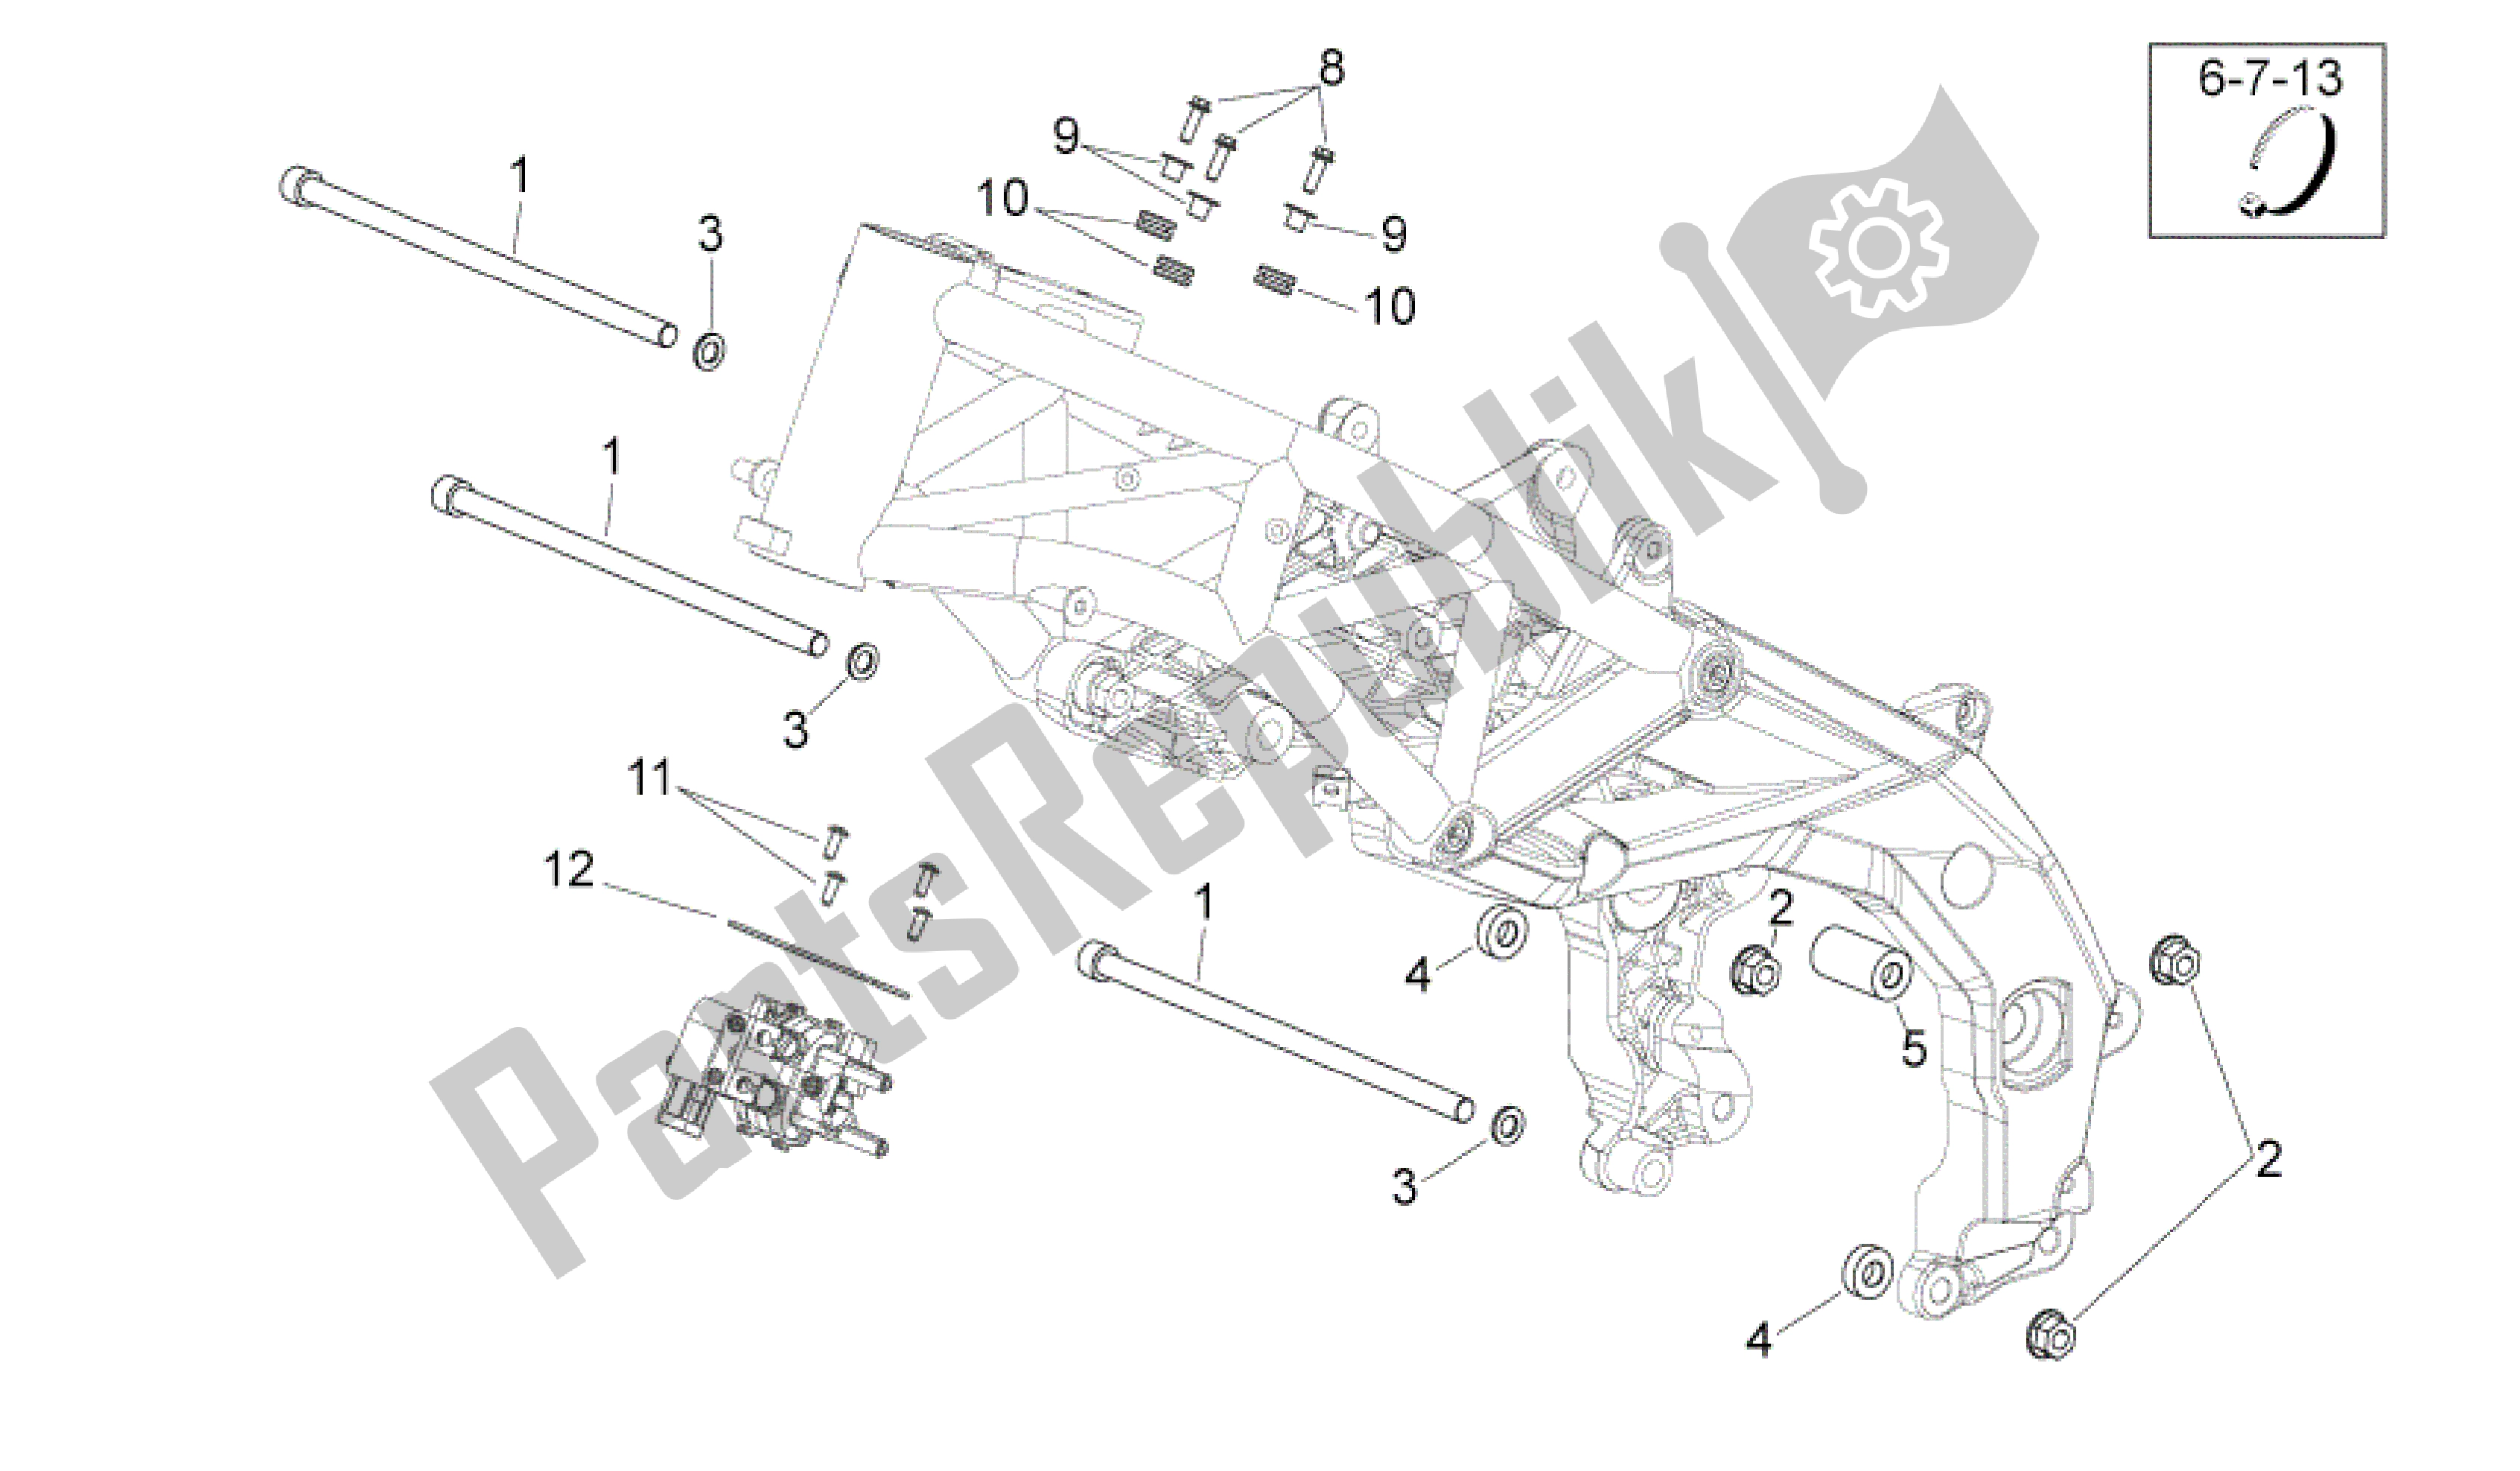 All parts for the Frame Ii of the Aprilia Shiver 750 2010 - 2013